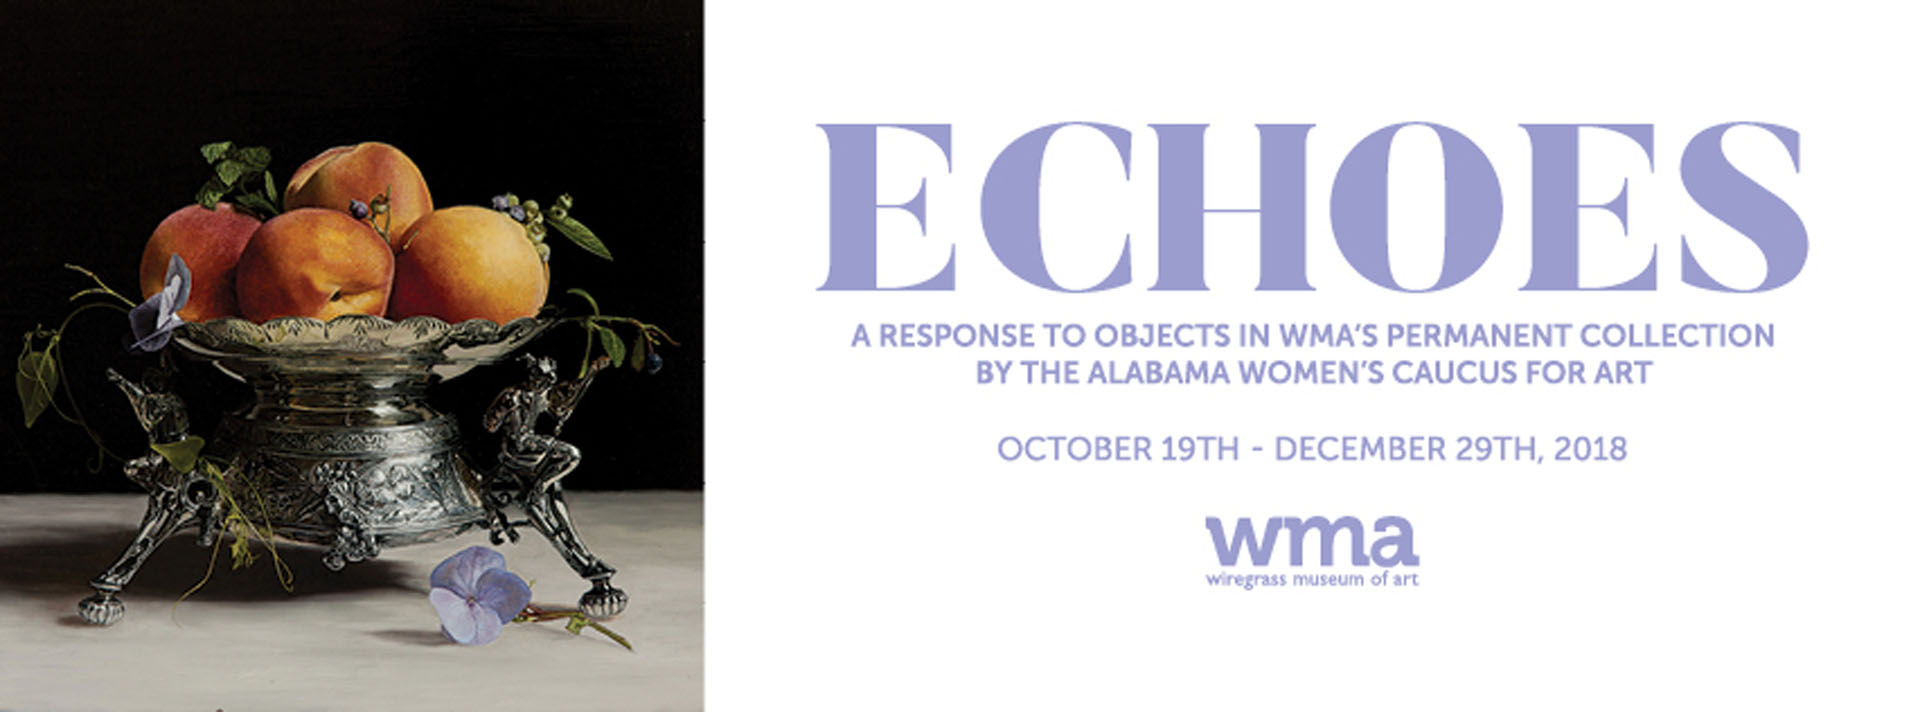 Just eight days left to see “Echoes” at WMA